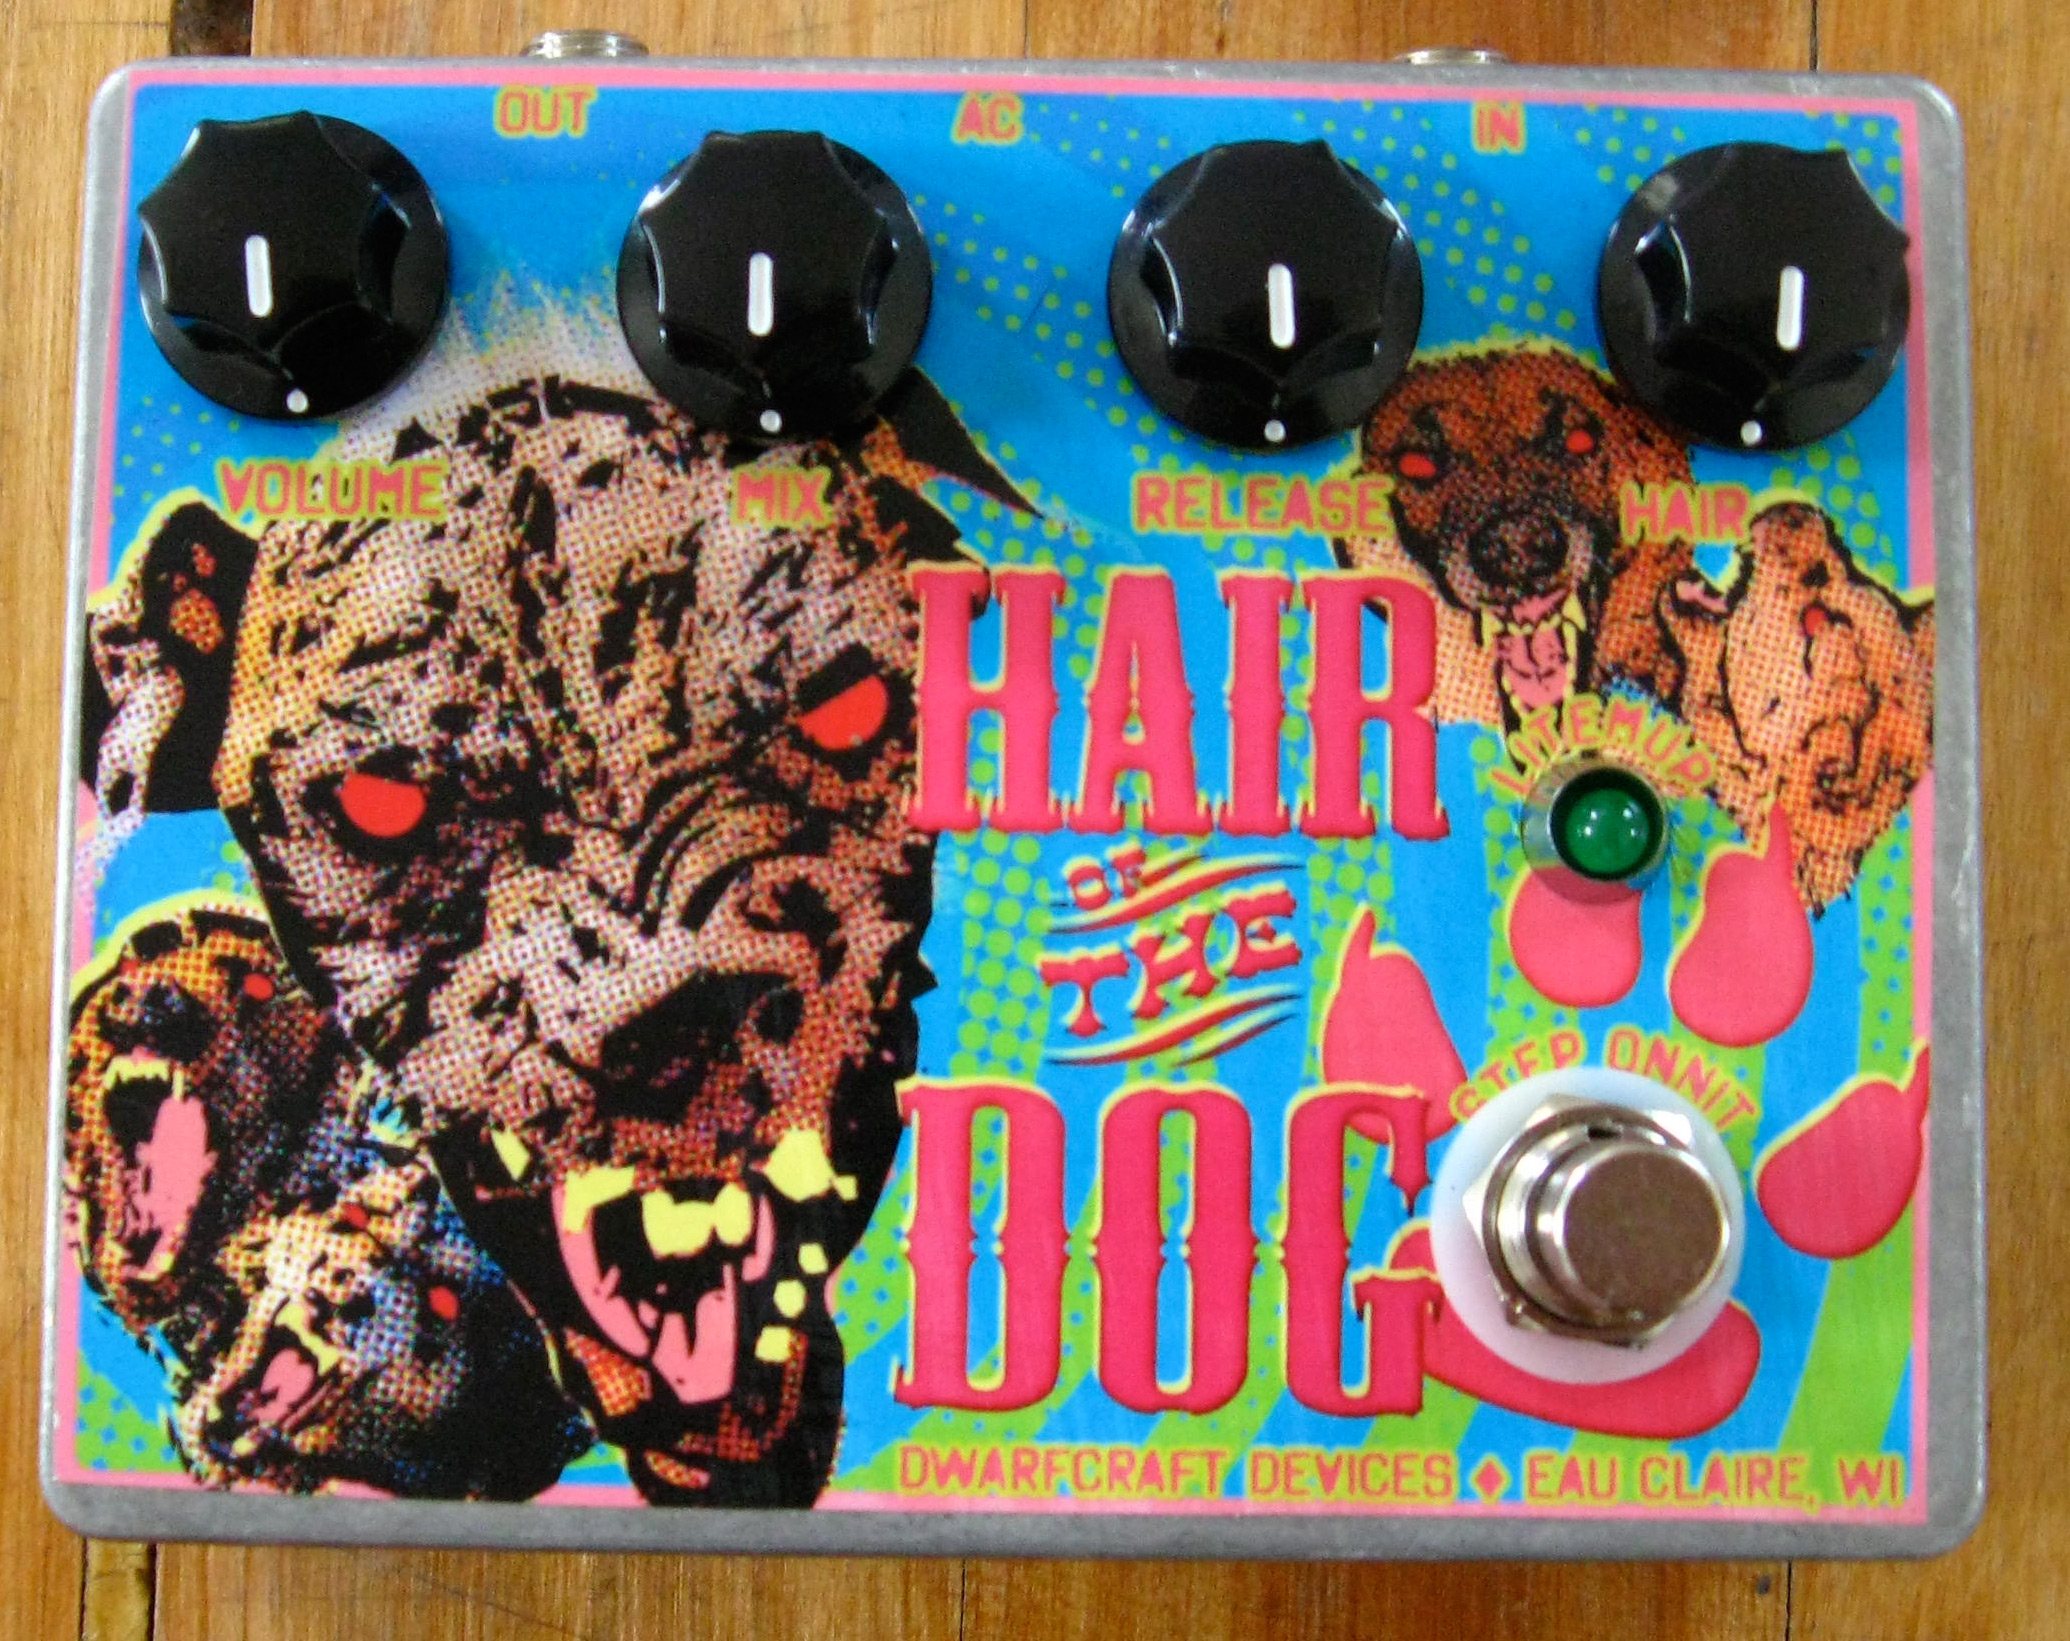 Dwarfcraft Devices Hair of the Dog